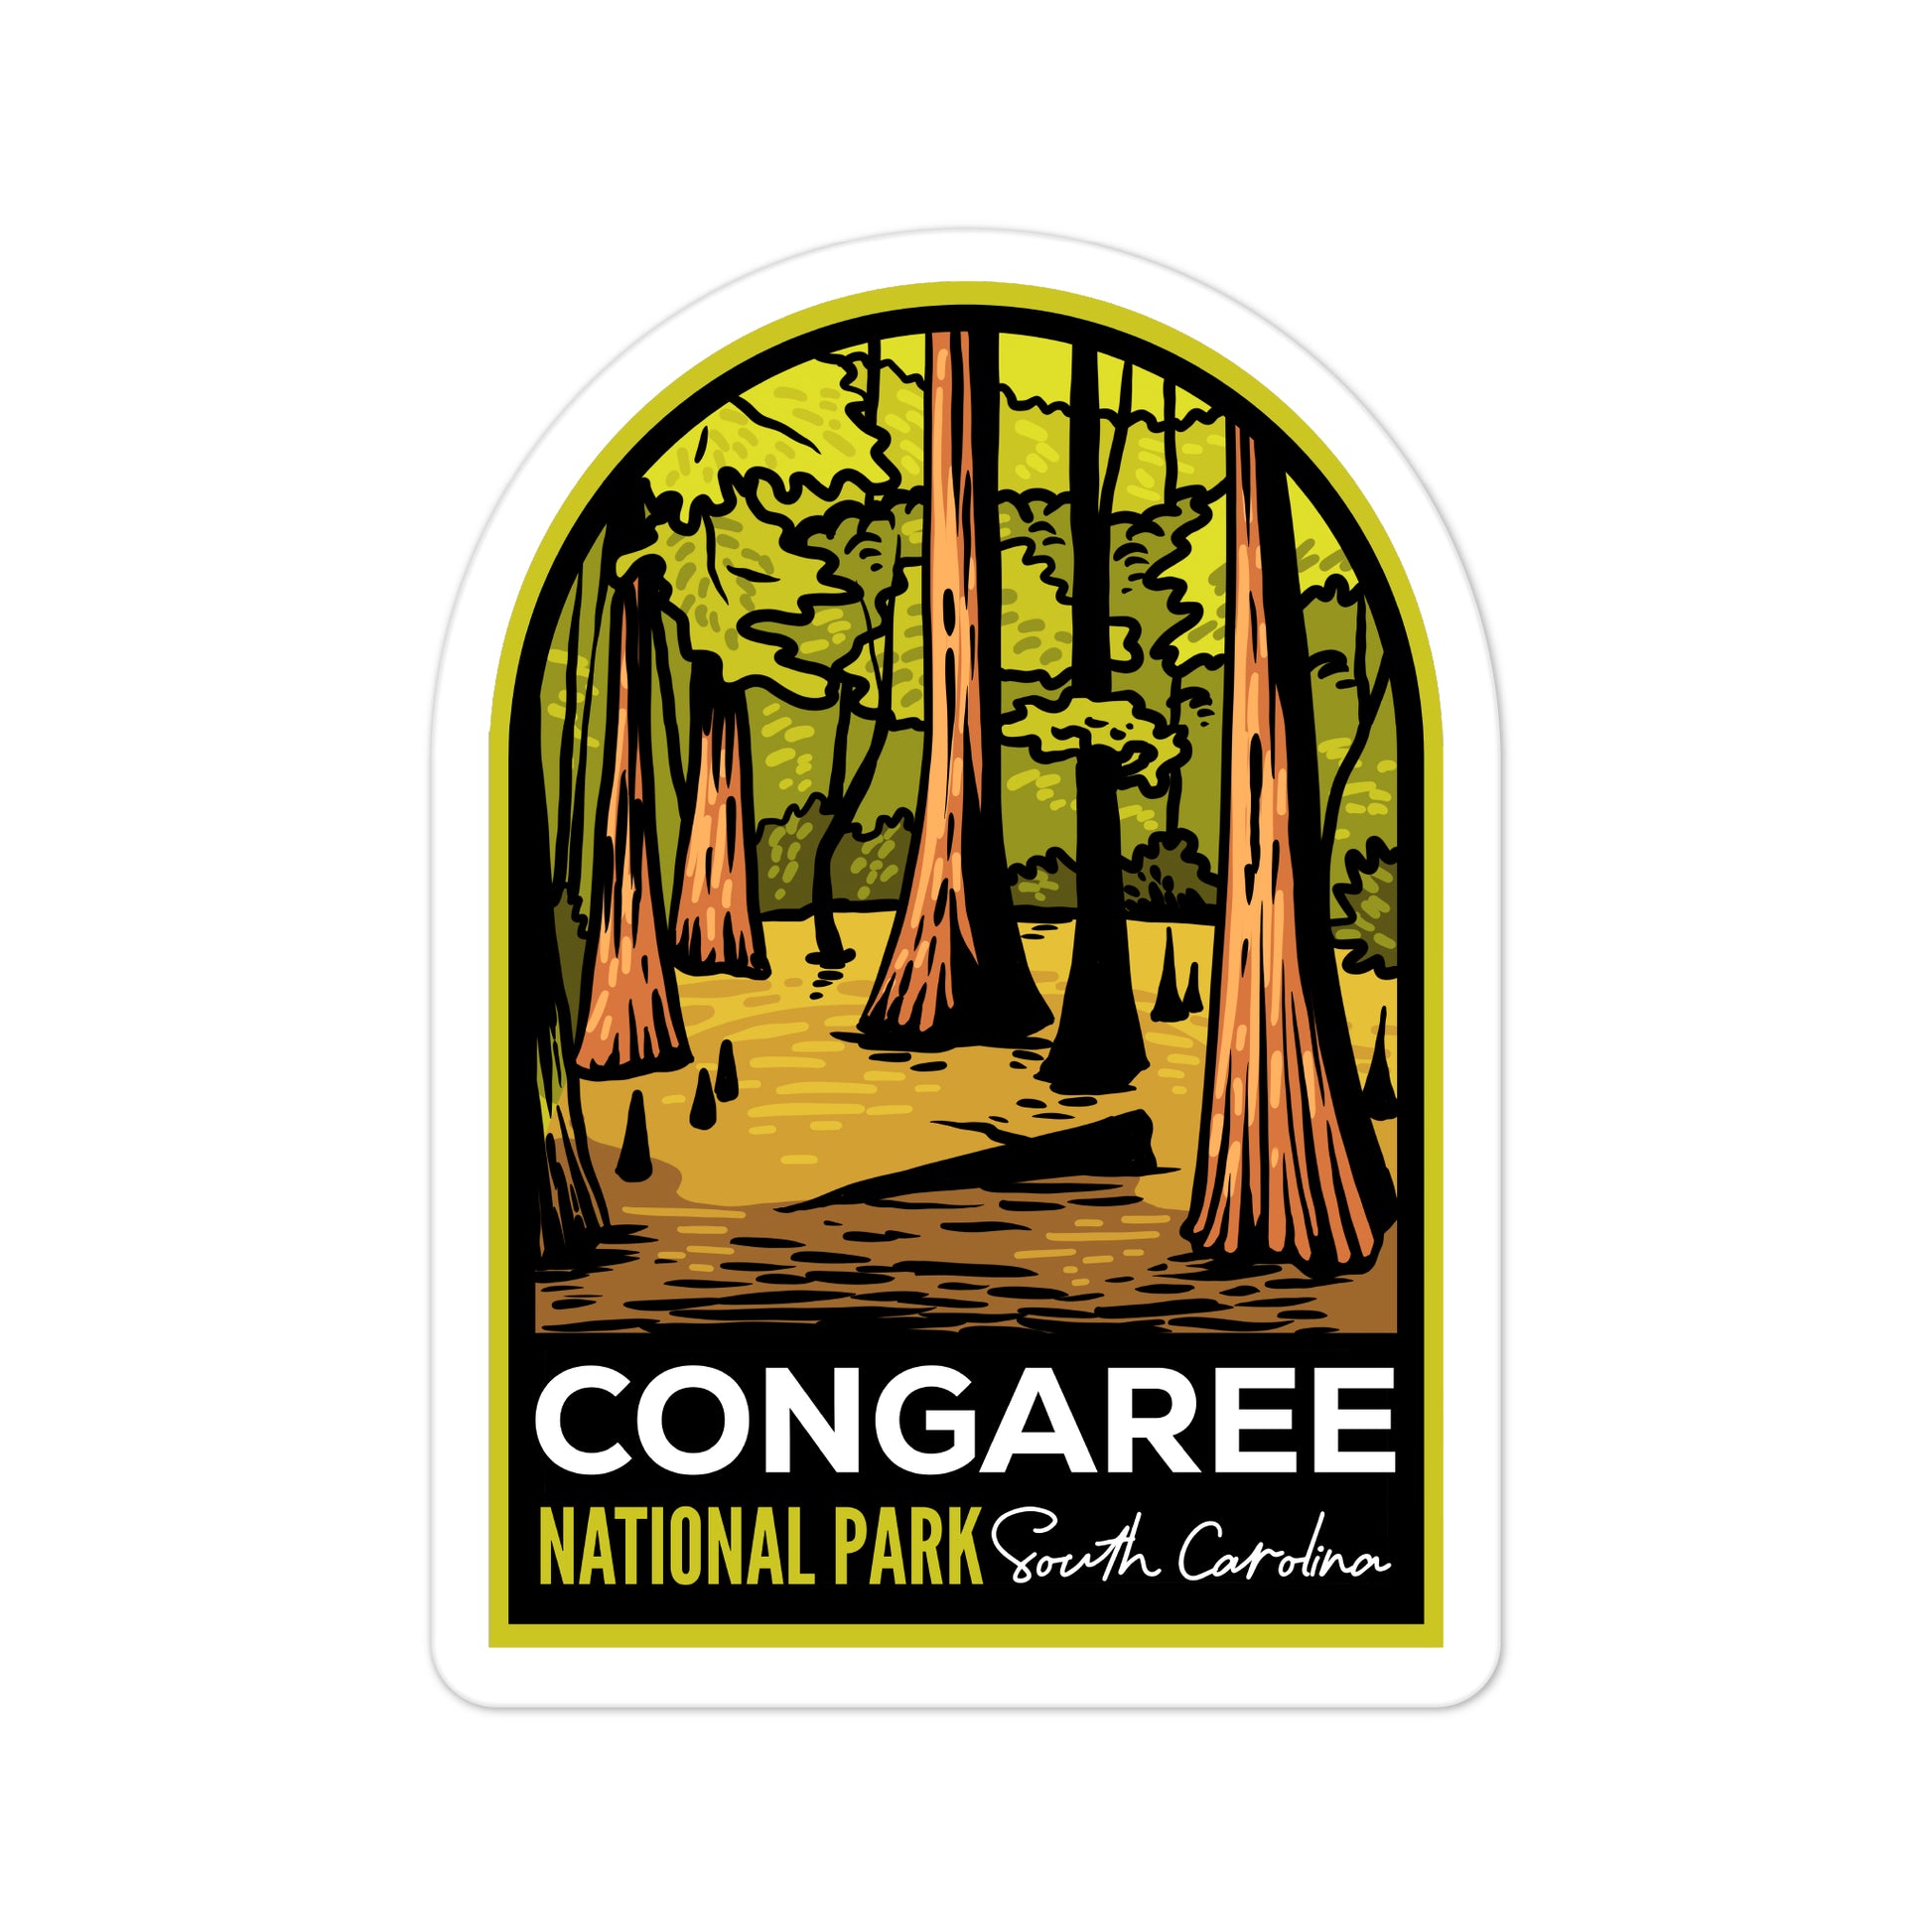 A sticker of Congaree National Park